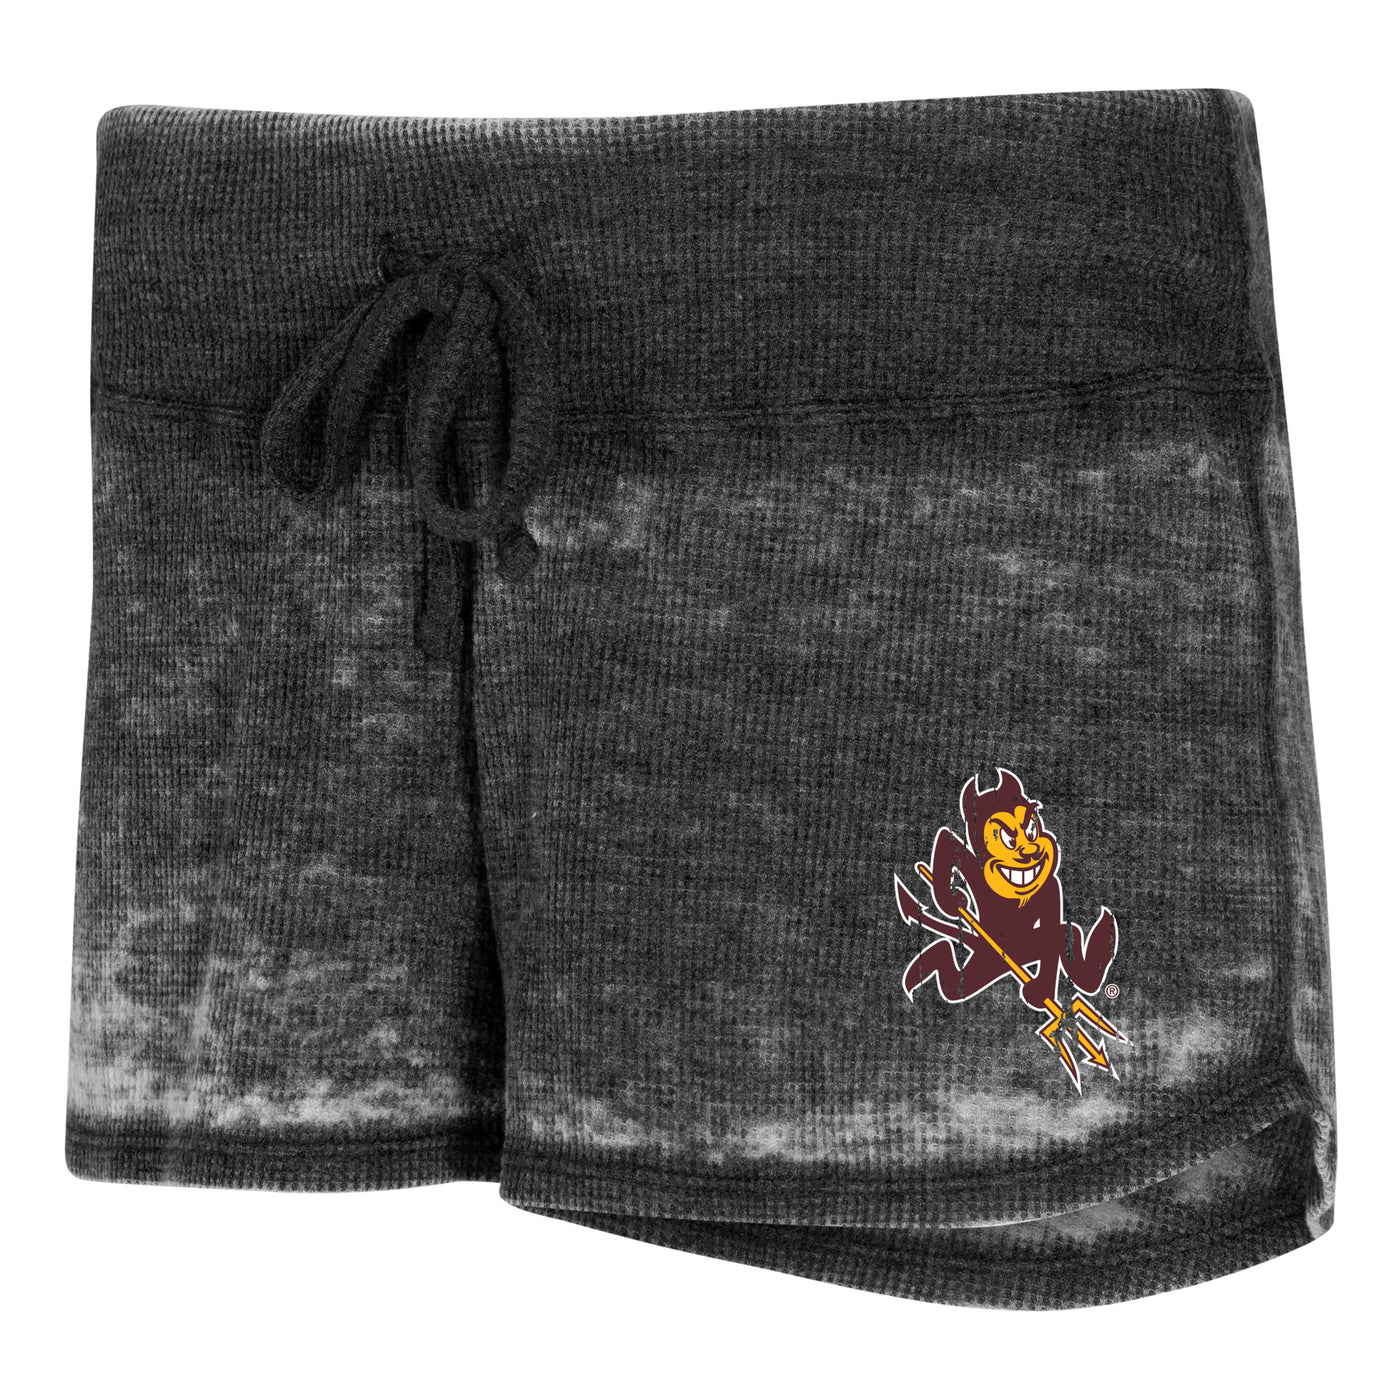 ASU gray waffle knit shorts with a Sparky on the leg and a gray drawstring